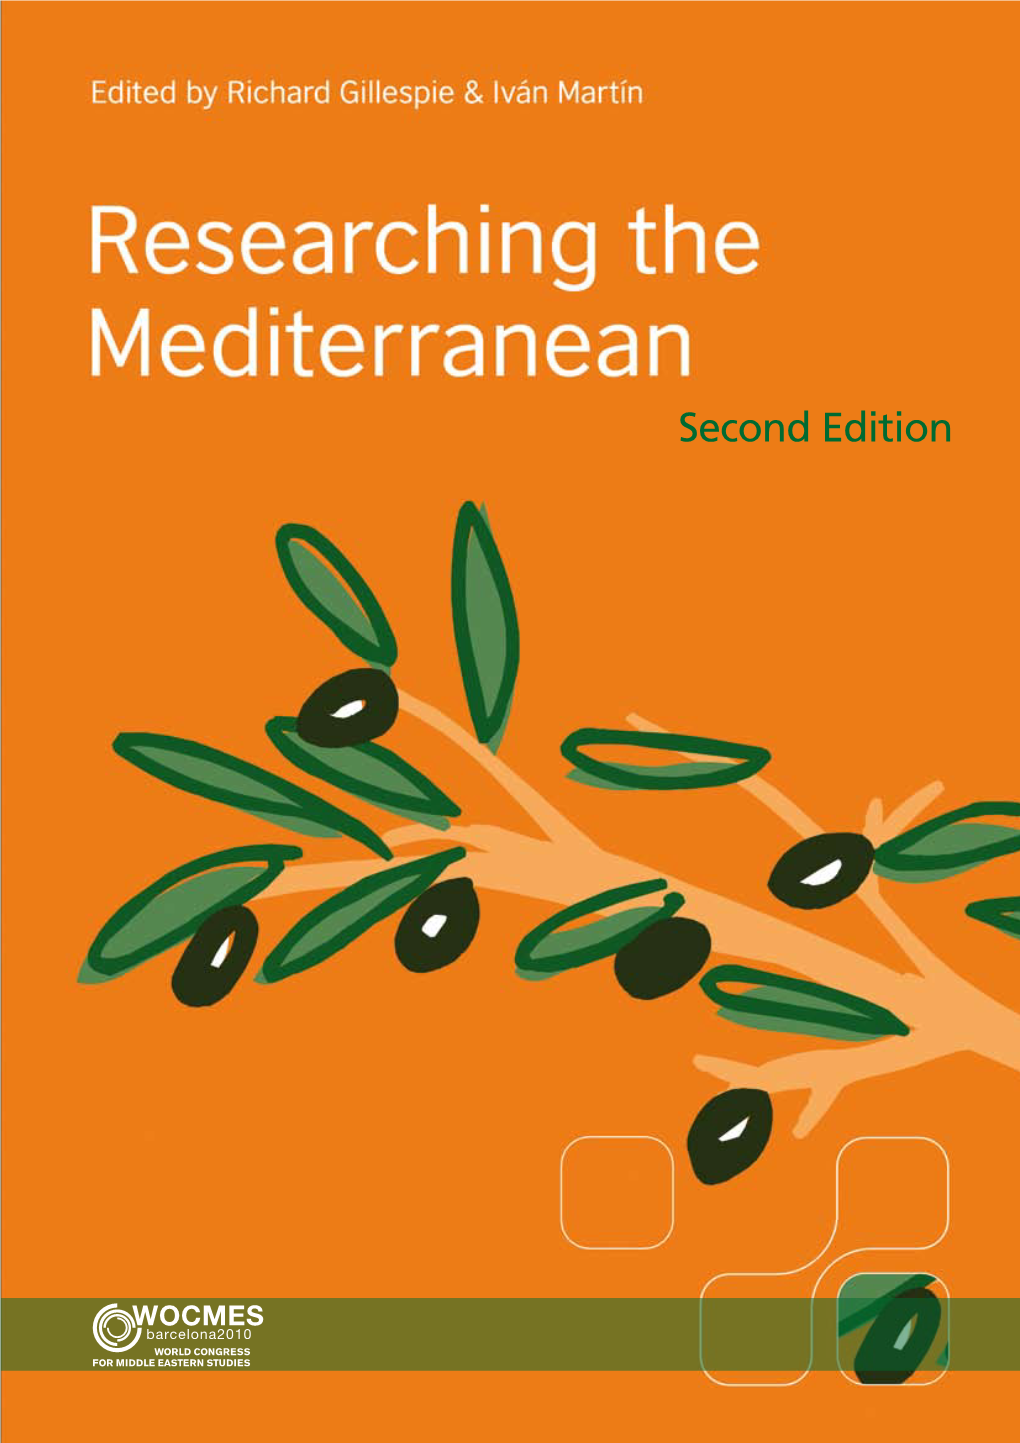 Second Edition of Researching the Mediterranean